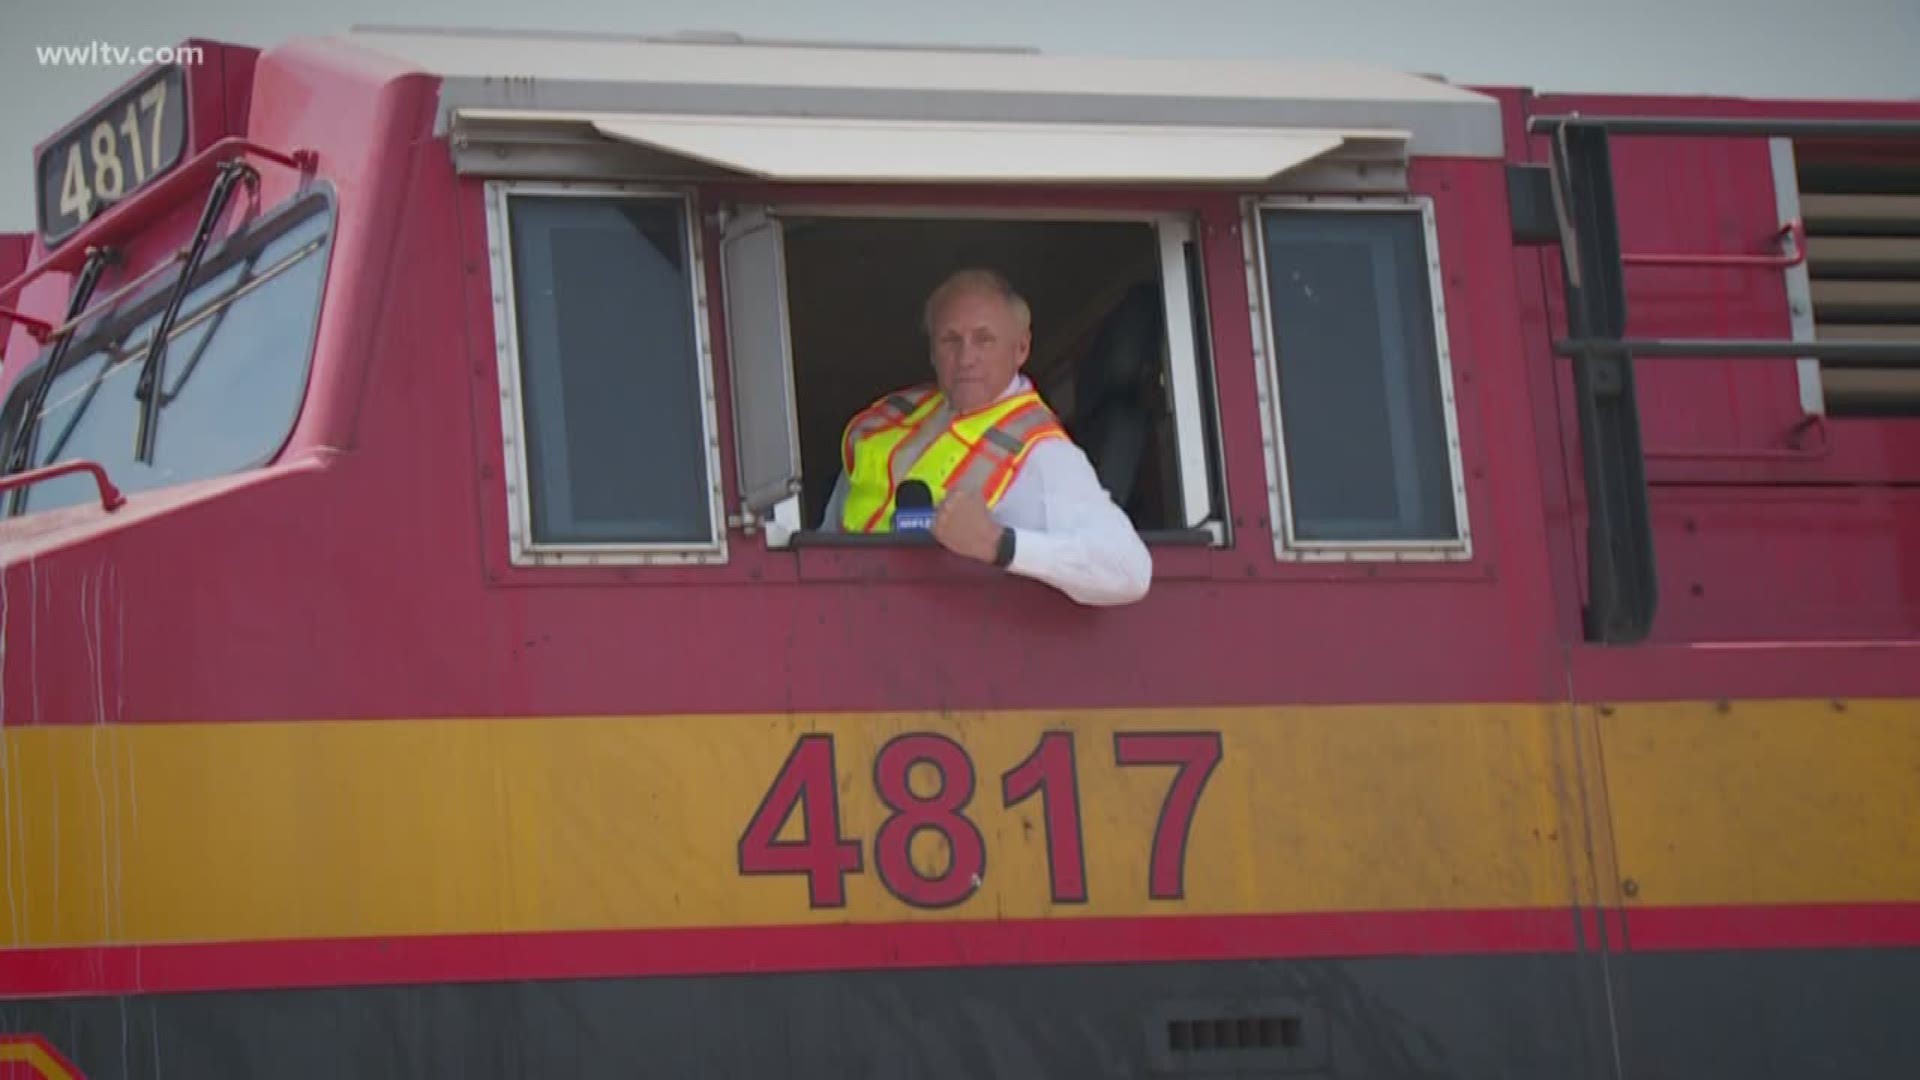 In honor of National Maritime Day, Eric Paulsen shows us what it means to be a railroader.